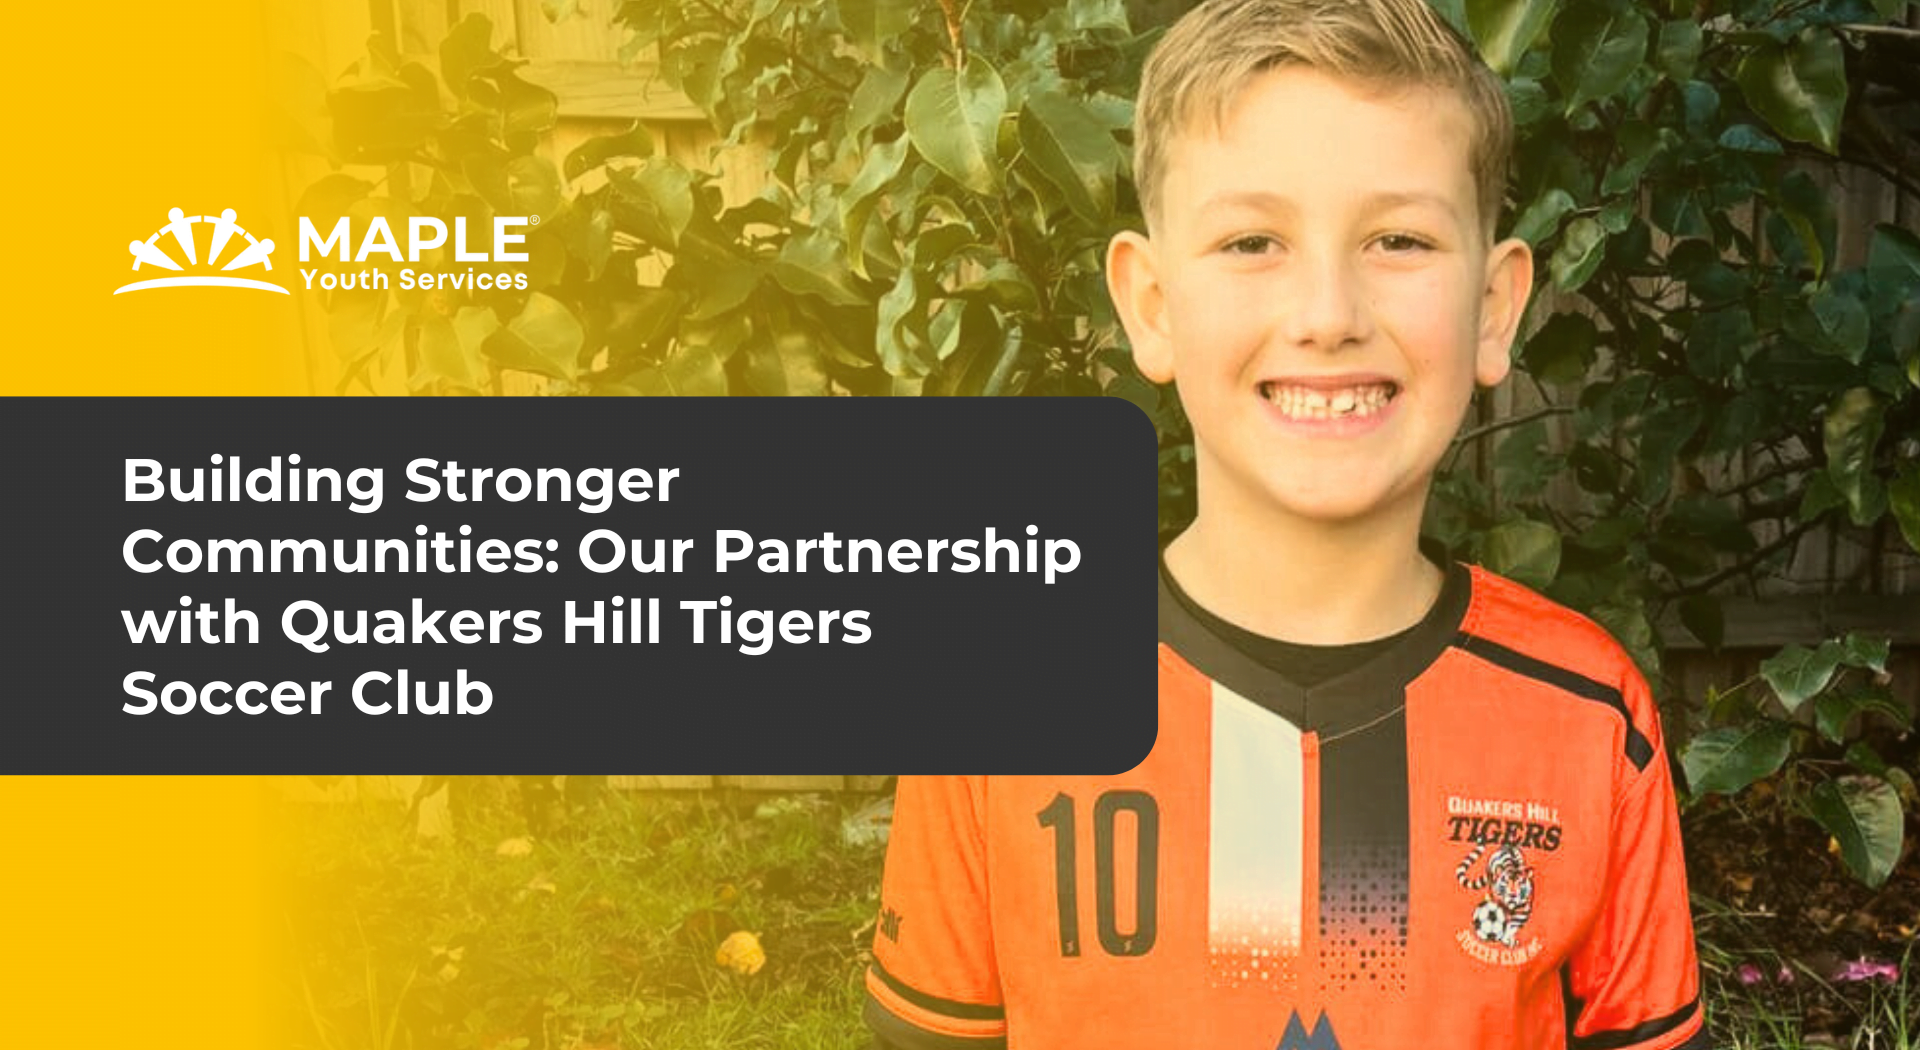 Building Stronger Communities: Our Partnership with Quakers Hill Tigers Soccer Club